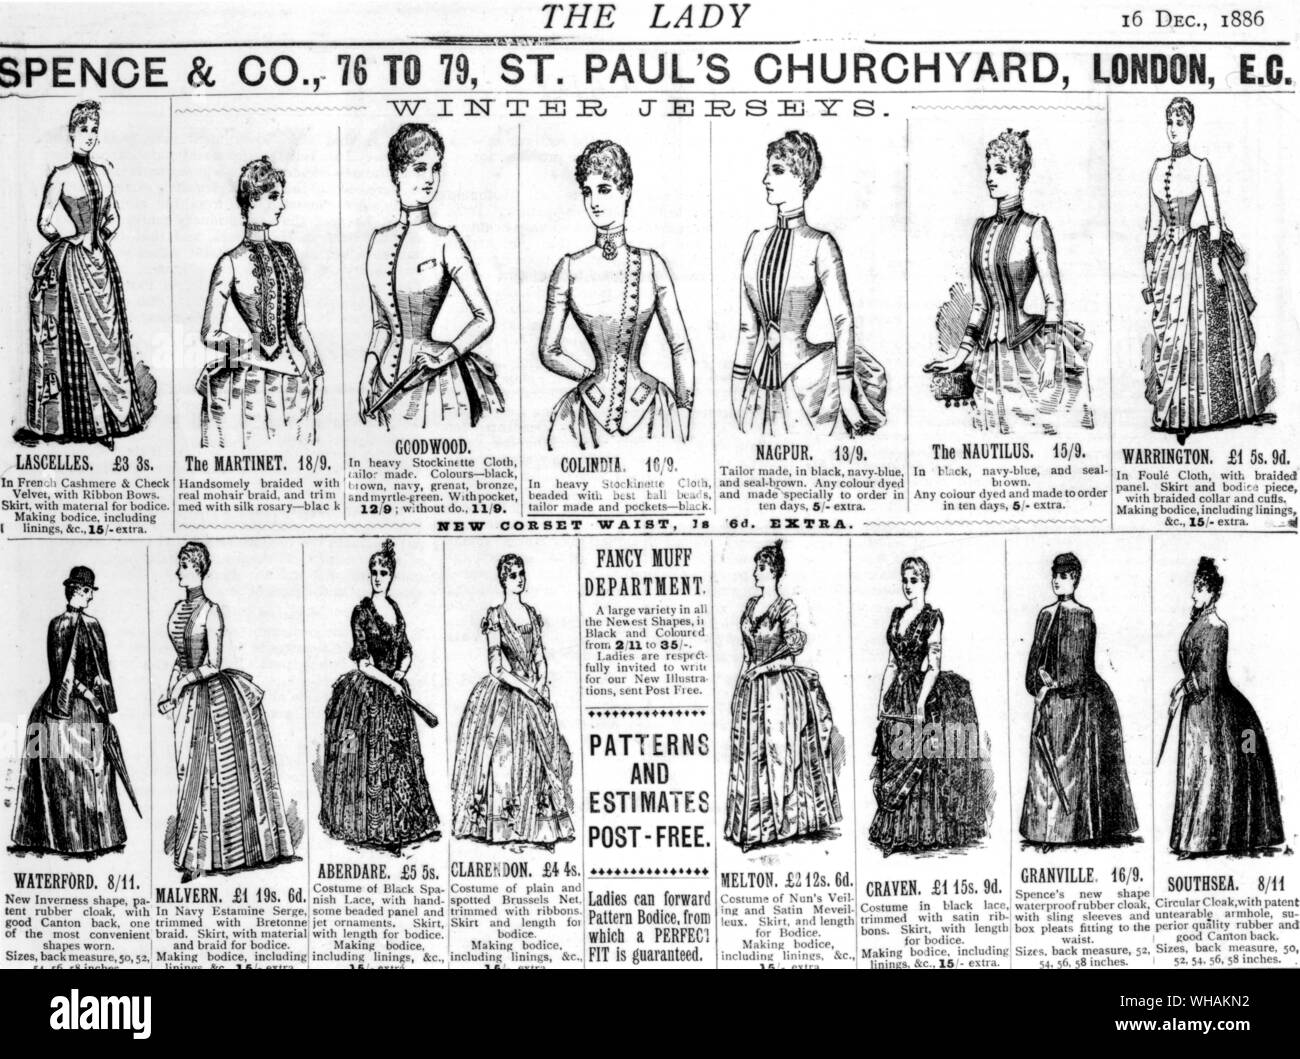 The Lady 16th December 1886. Ready to Wear dresses Stock Photo